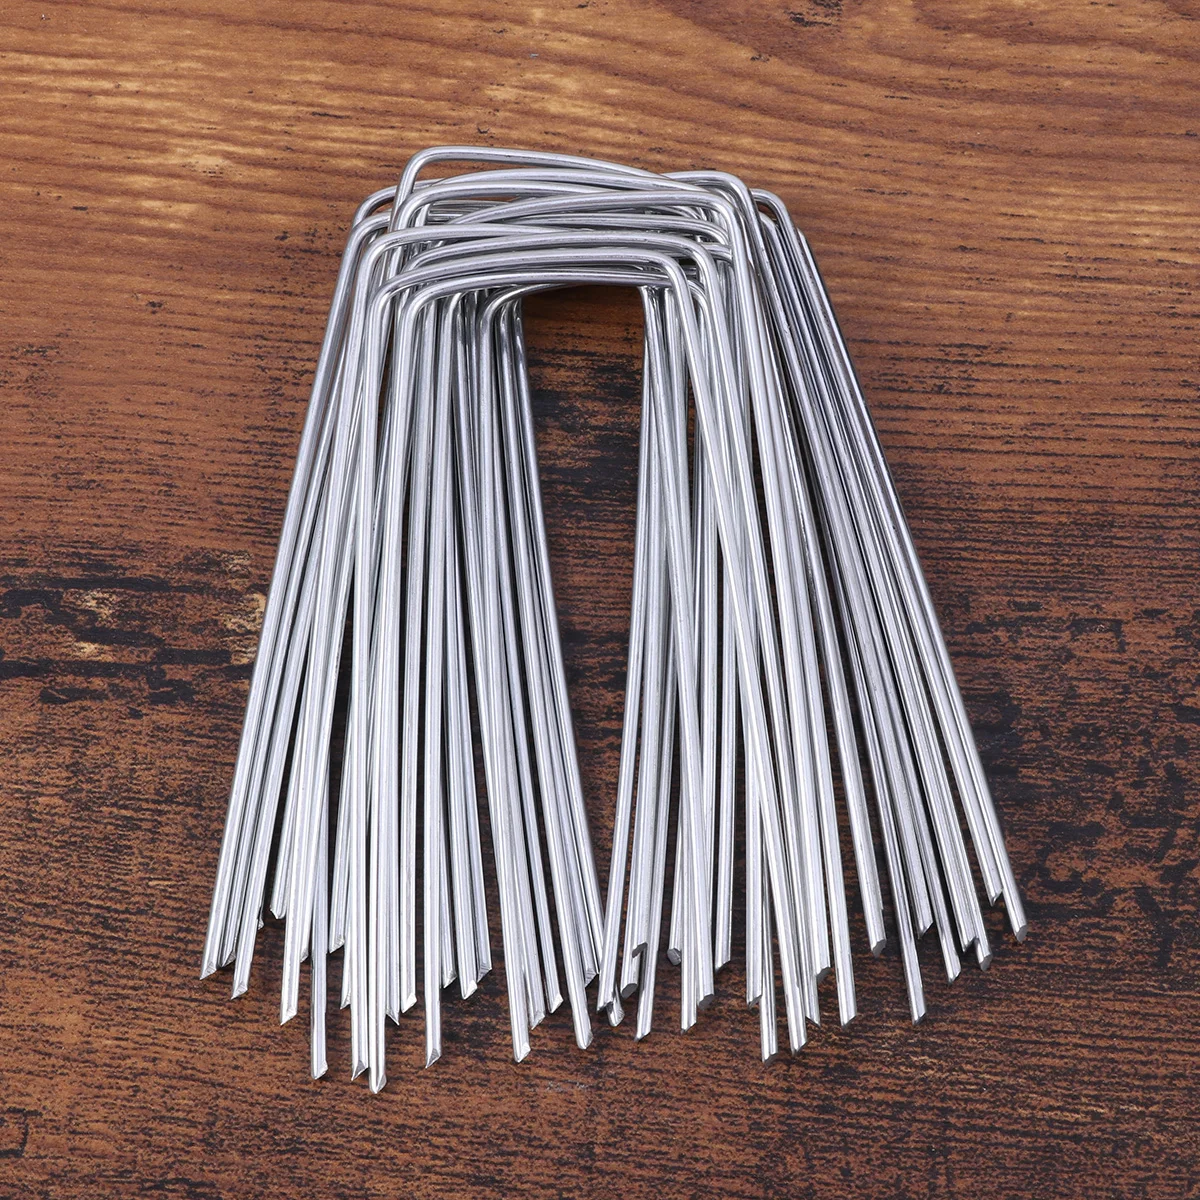 

50pcs Galvanized Landscape Staples U shape Garden Stakes Turf Staples Heavy Duty Sod Fence Stakes Pegs Securing Pegs